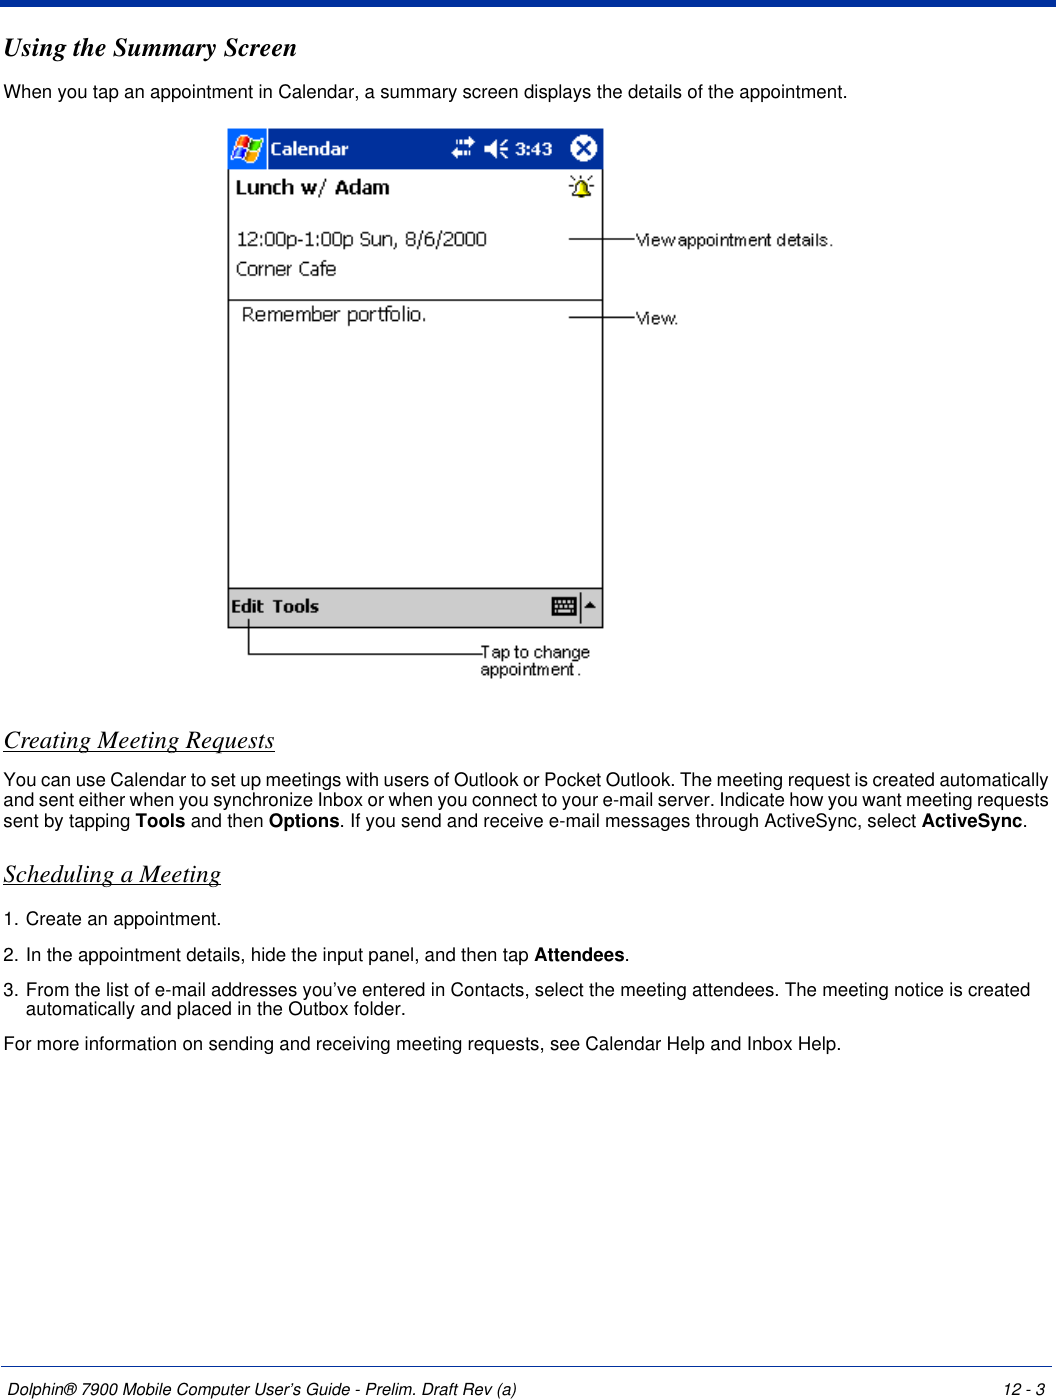 Dolphin® 7900 Mobile Computer User’s Guide - Prelim. Draft Rev (a) 12 - 3Using the Summary ScreenWhen you tap an appointment in Calendar, a summary screen displays the details of the appointment.Creating Meeting RequestsYou can use Calendar to set up meetings with users of Outlook or Pocket Outlook. The meeting request is created automatically and sent either when you synchronize Inbox or when you connect to your e-mail server. Indicate how you want meeting requests sent by tapping Tools and then Options. If you send and receive e-mail messages through ActiveSync, select ActiveSync.Scheduling a Meeting1. Create an appointment.2. In the appointment details, hide the input panel, and then tap Attendees.3. From the list of e-mail addresses you’ve entered in Contacts, select the meeting attendees. The meeting notice is created automatically and placed in the Outbox folder.For more information on sending and receiving meeting requests, see Calendar Help and Inbox Help.